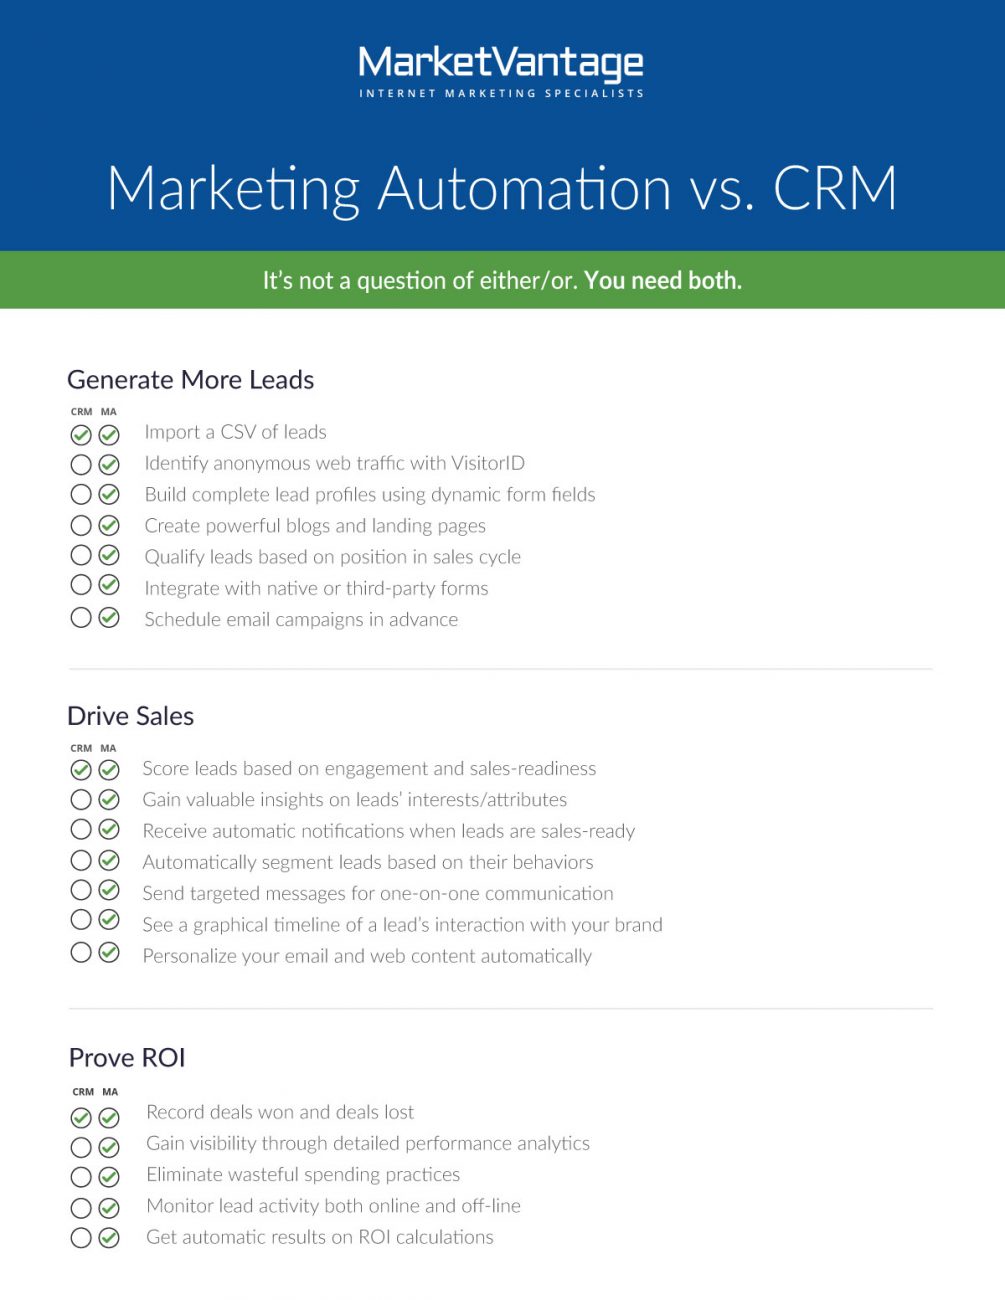 A chart showing the comparison between a marketing automation platform and CRM.